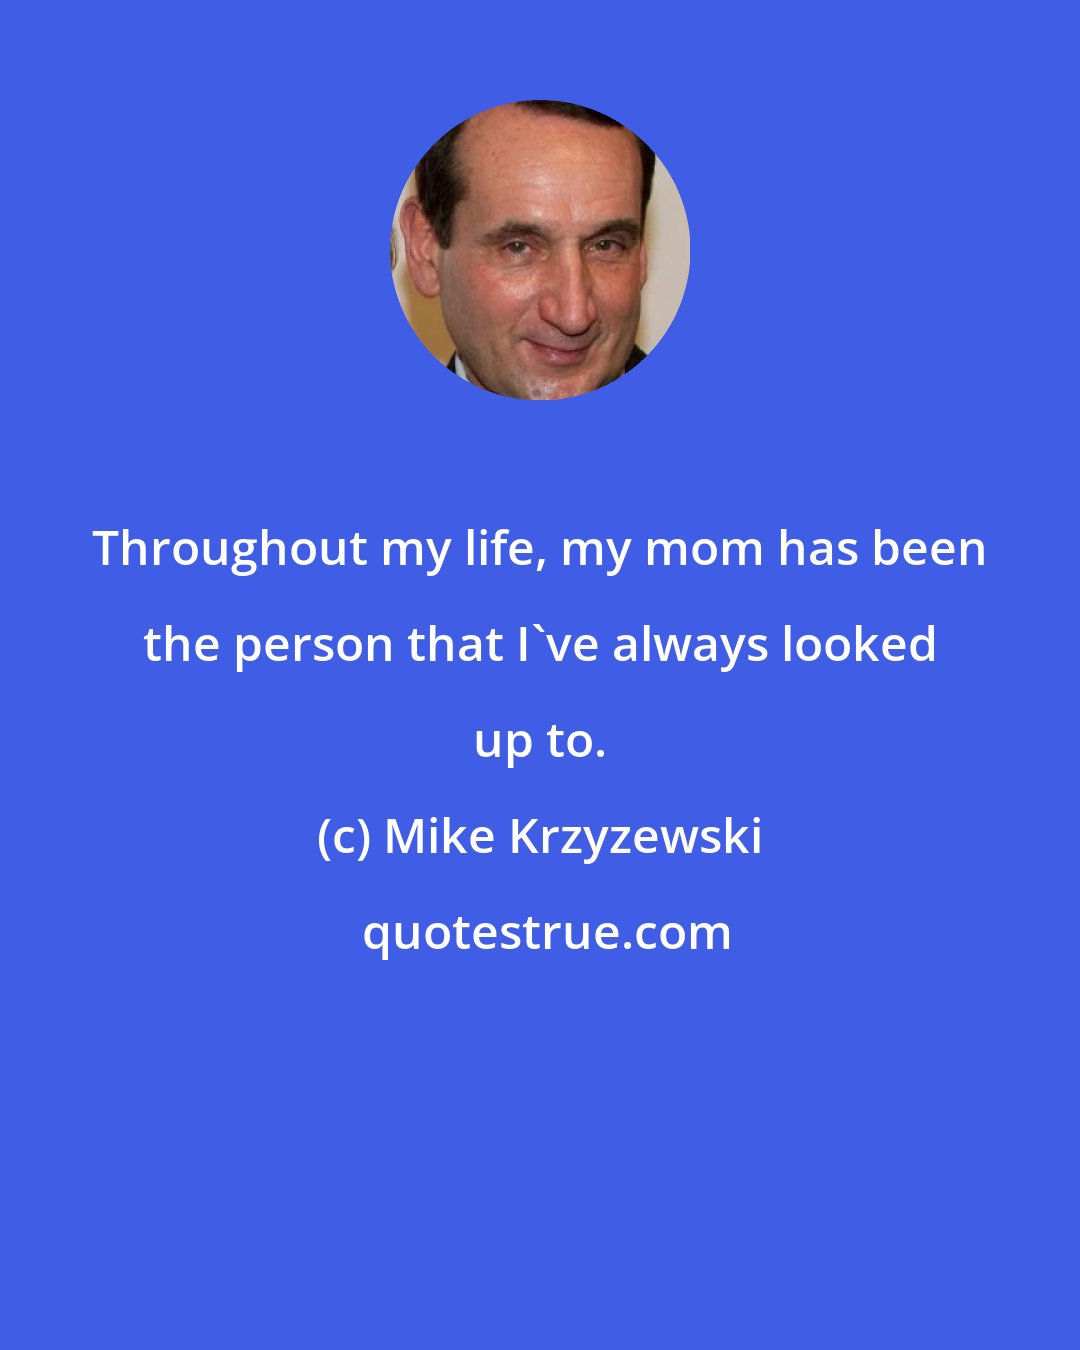 Mike Krzyzewski: Throughout my life, my mom has been the person that I've always looked up to.